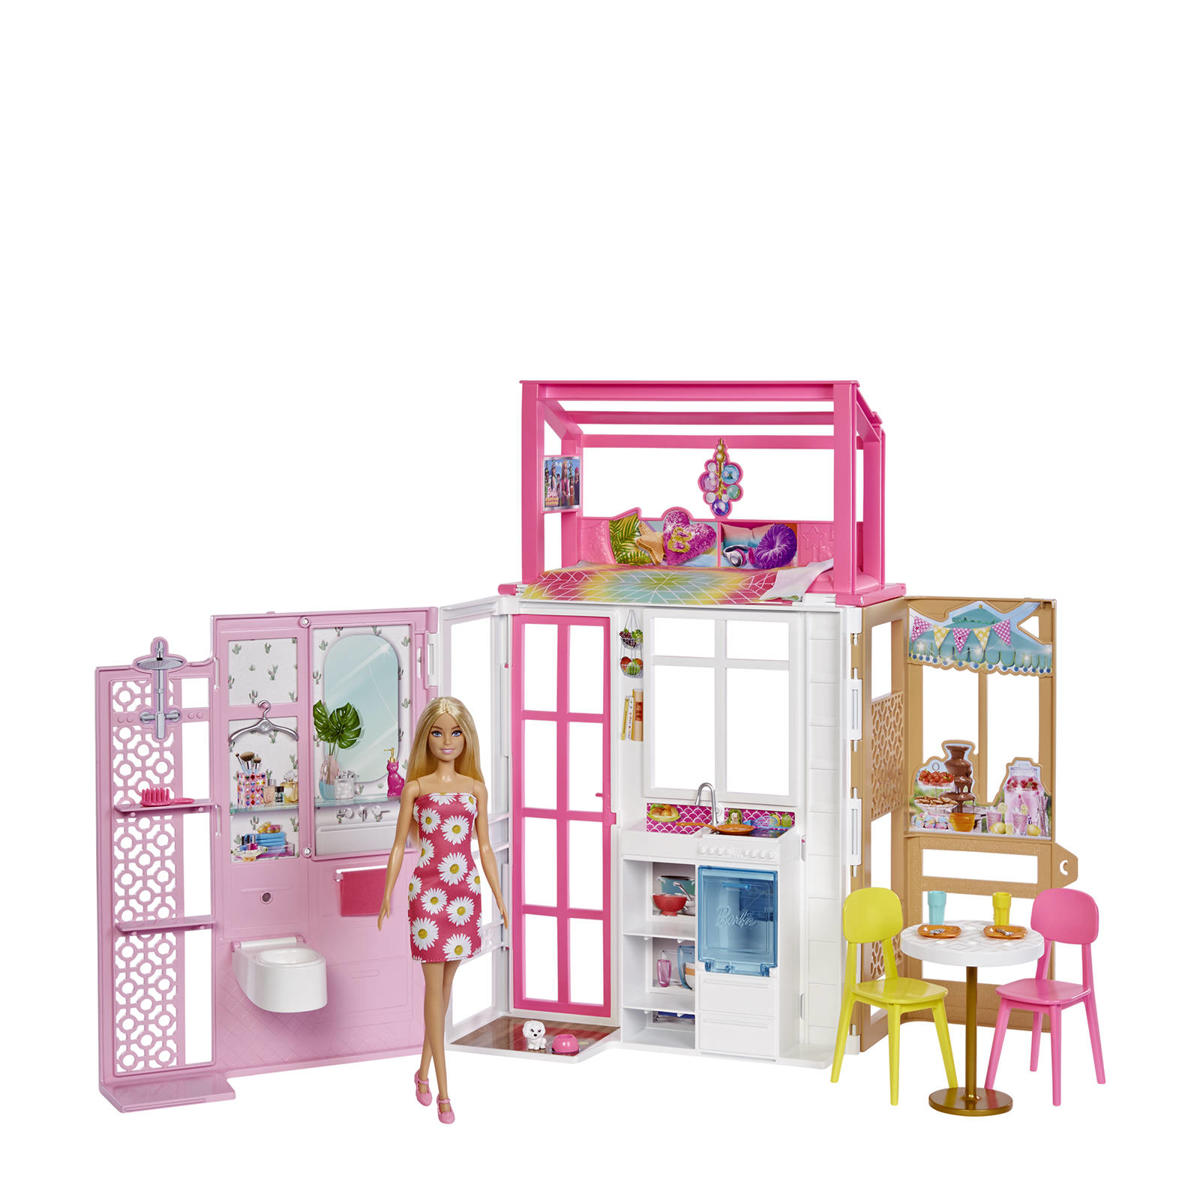 Broer bereik uitdrukking Barbie Dollhouse Playset with Doll & House with 2 Levels & 4 Play Areas |  wehkamp